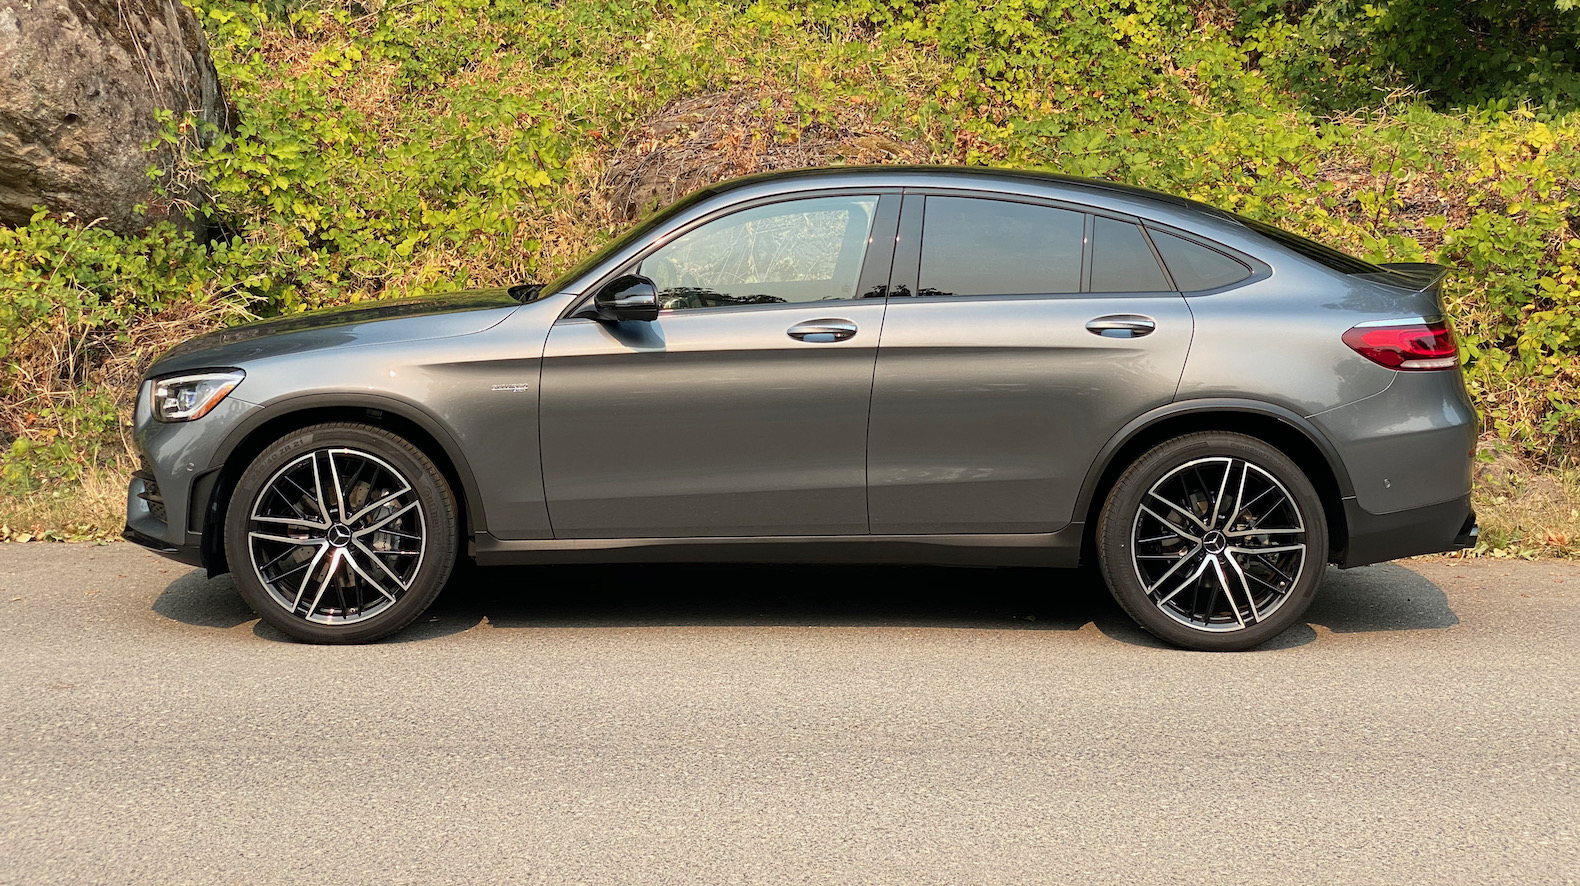 2020 Mercedes-AMG GLC 43 Coupe Review: The perfect balance - The Torque  Report